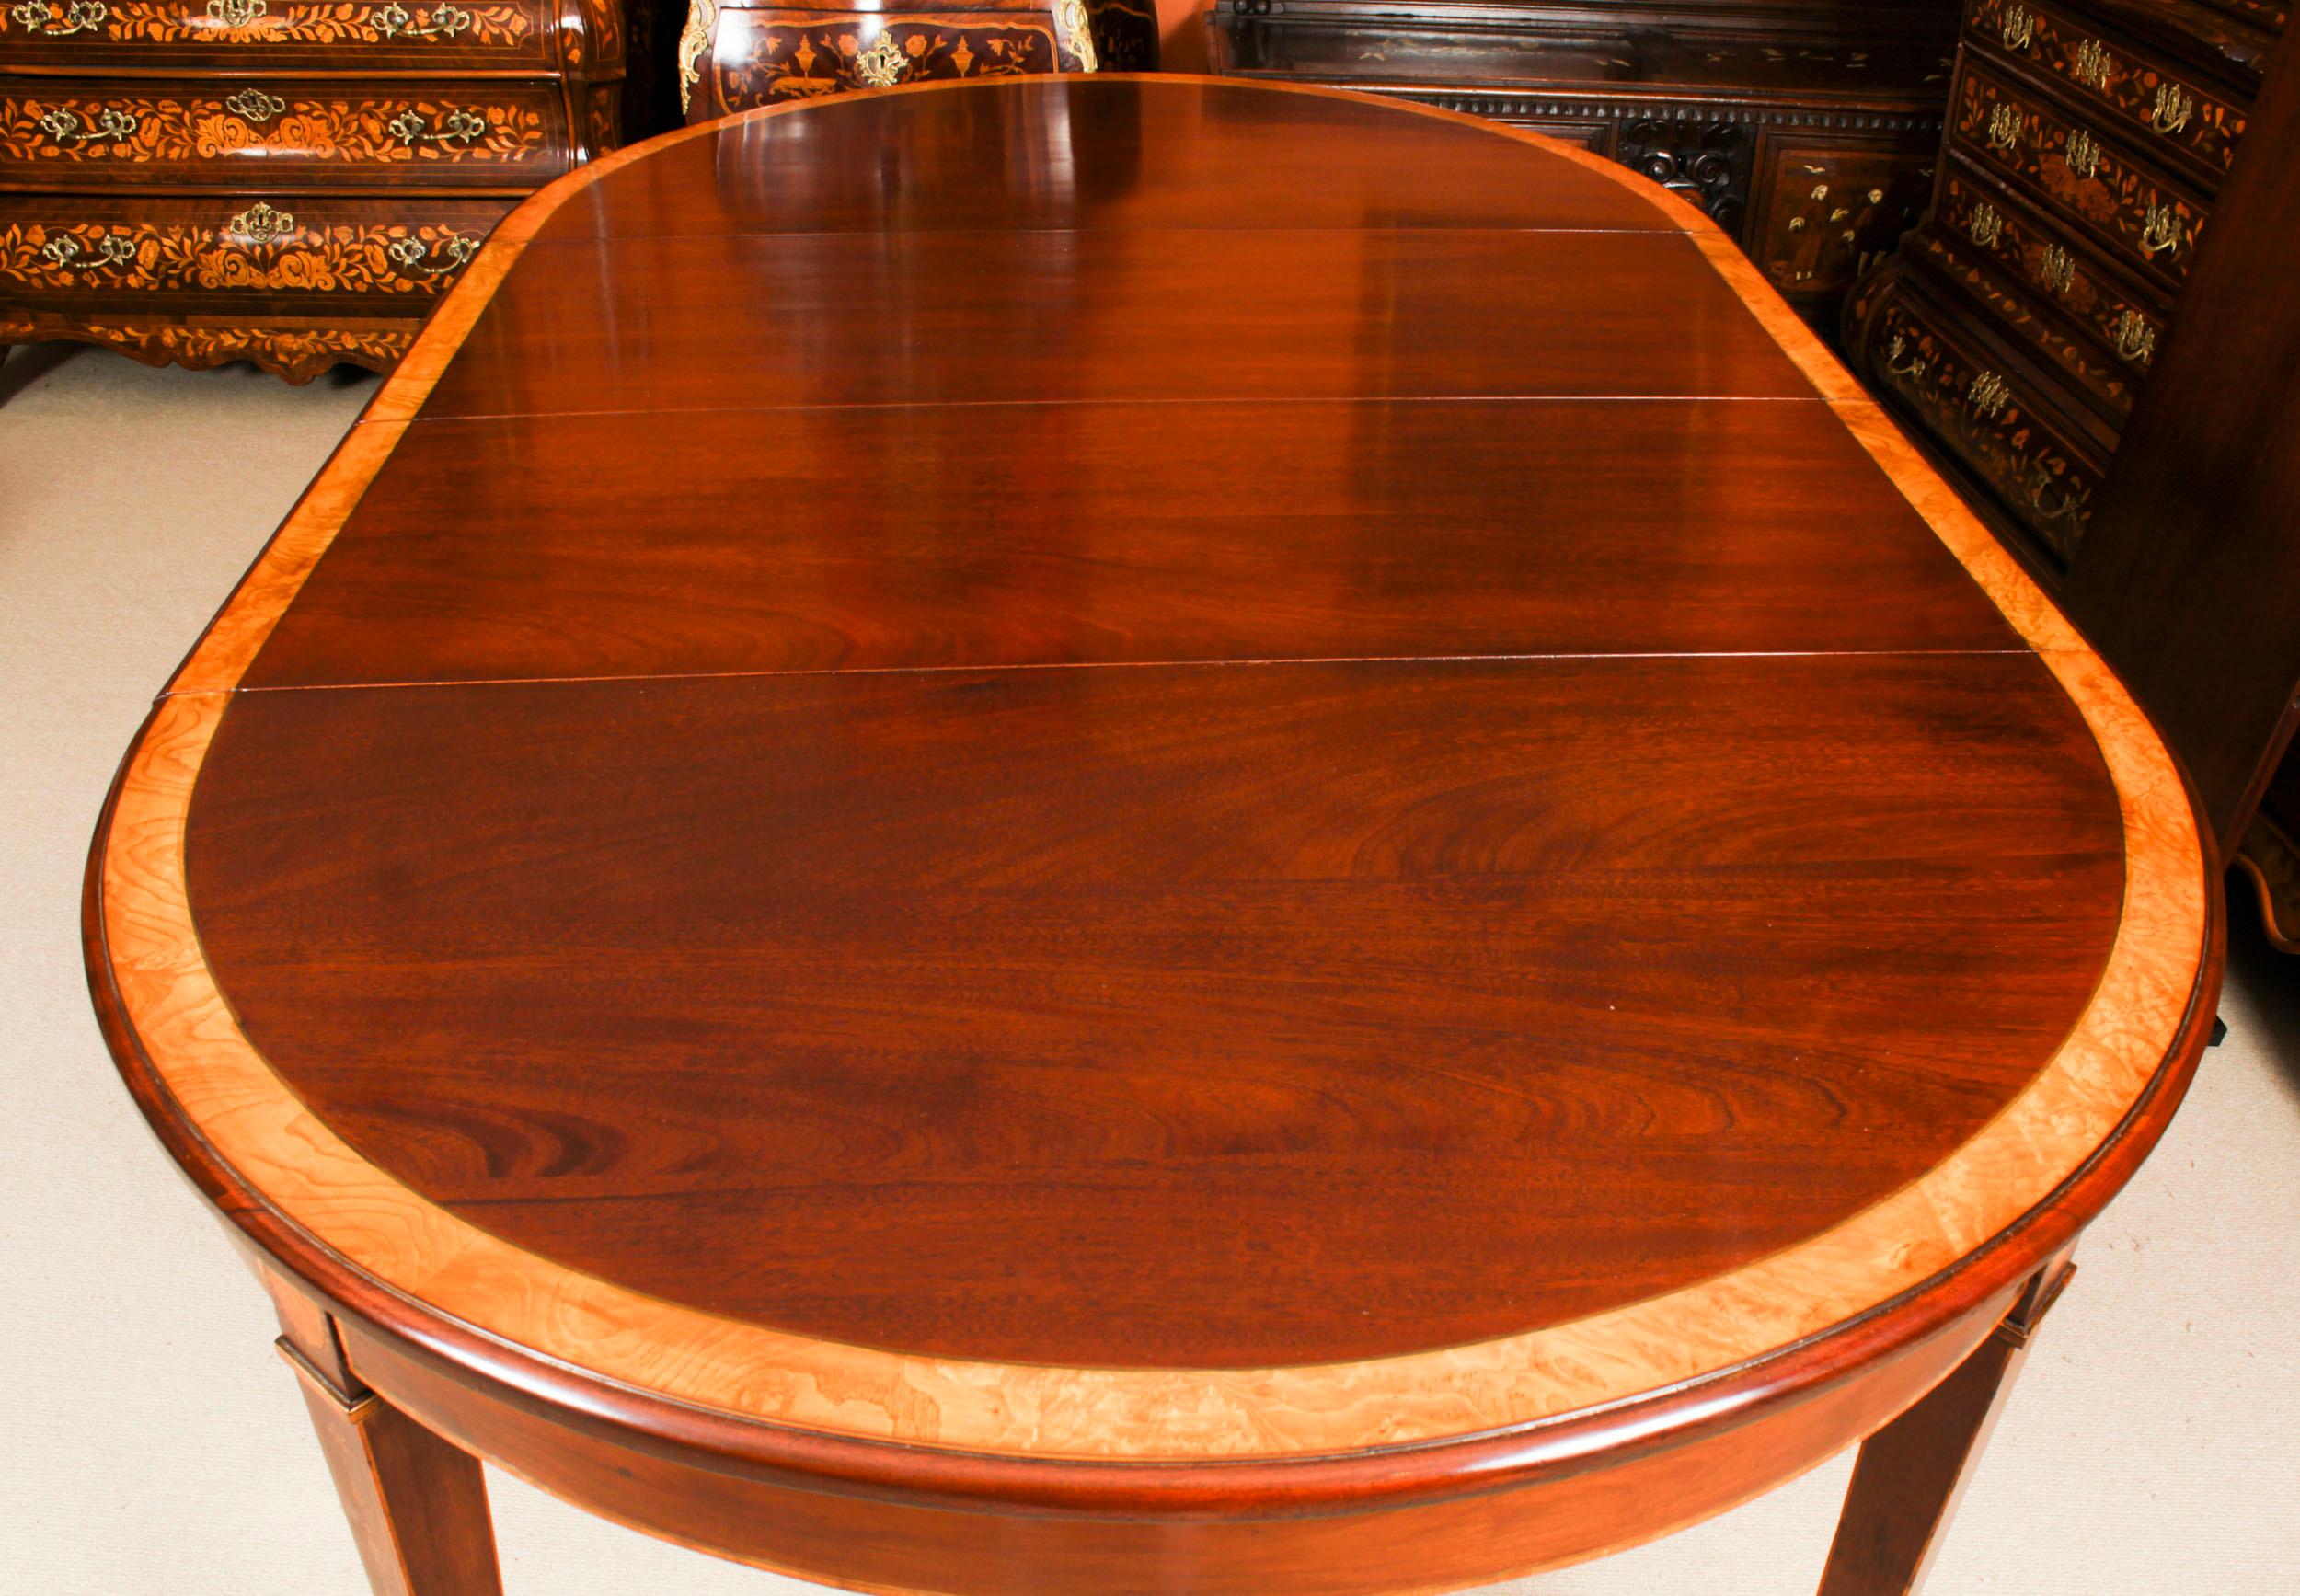 Antique Edwardian Inlaid Flame Mahogany Extending Dining Table Early 20th C. 11